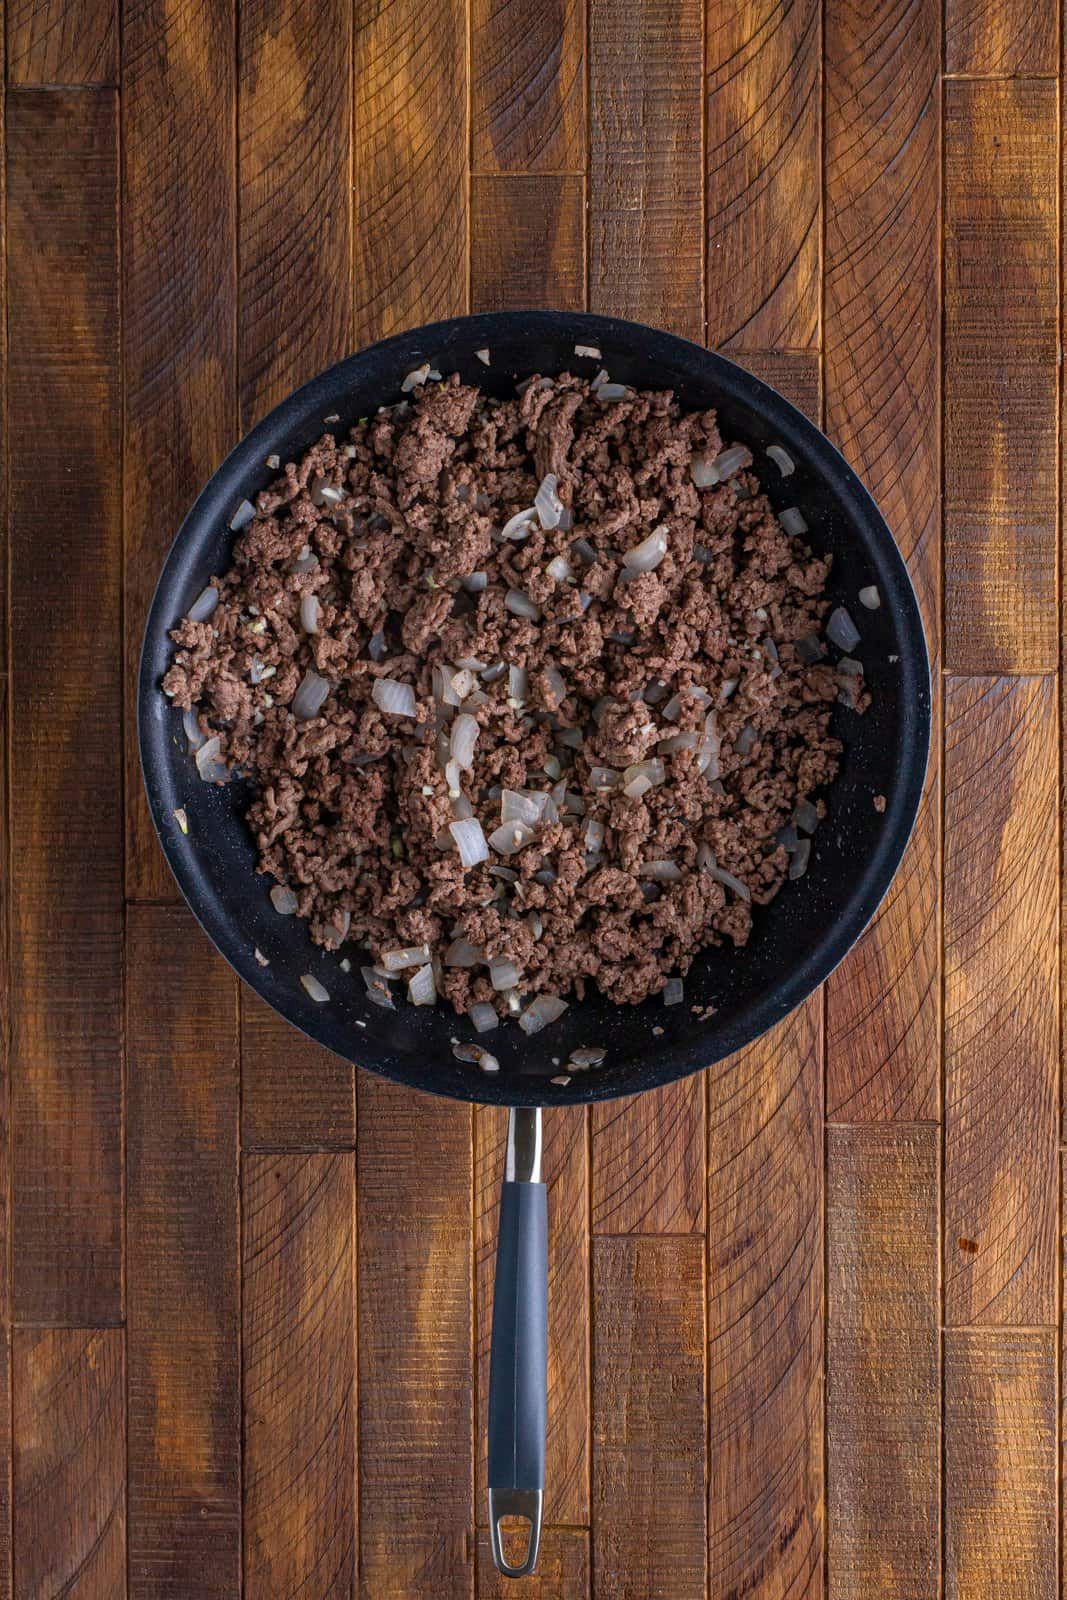 A skillet with cooked ground beef and onion.